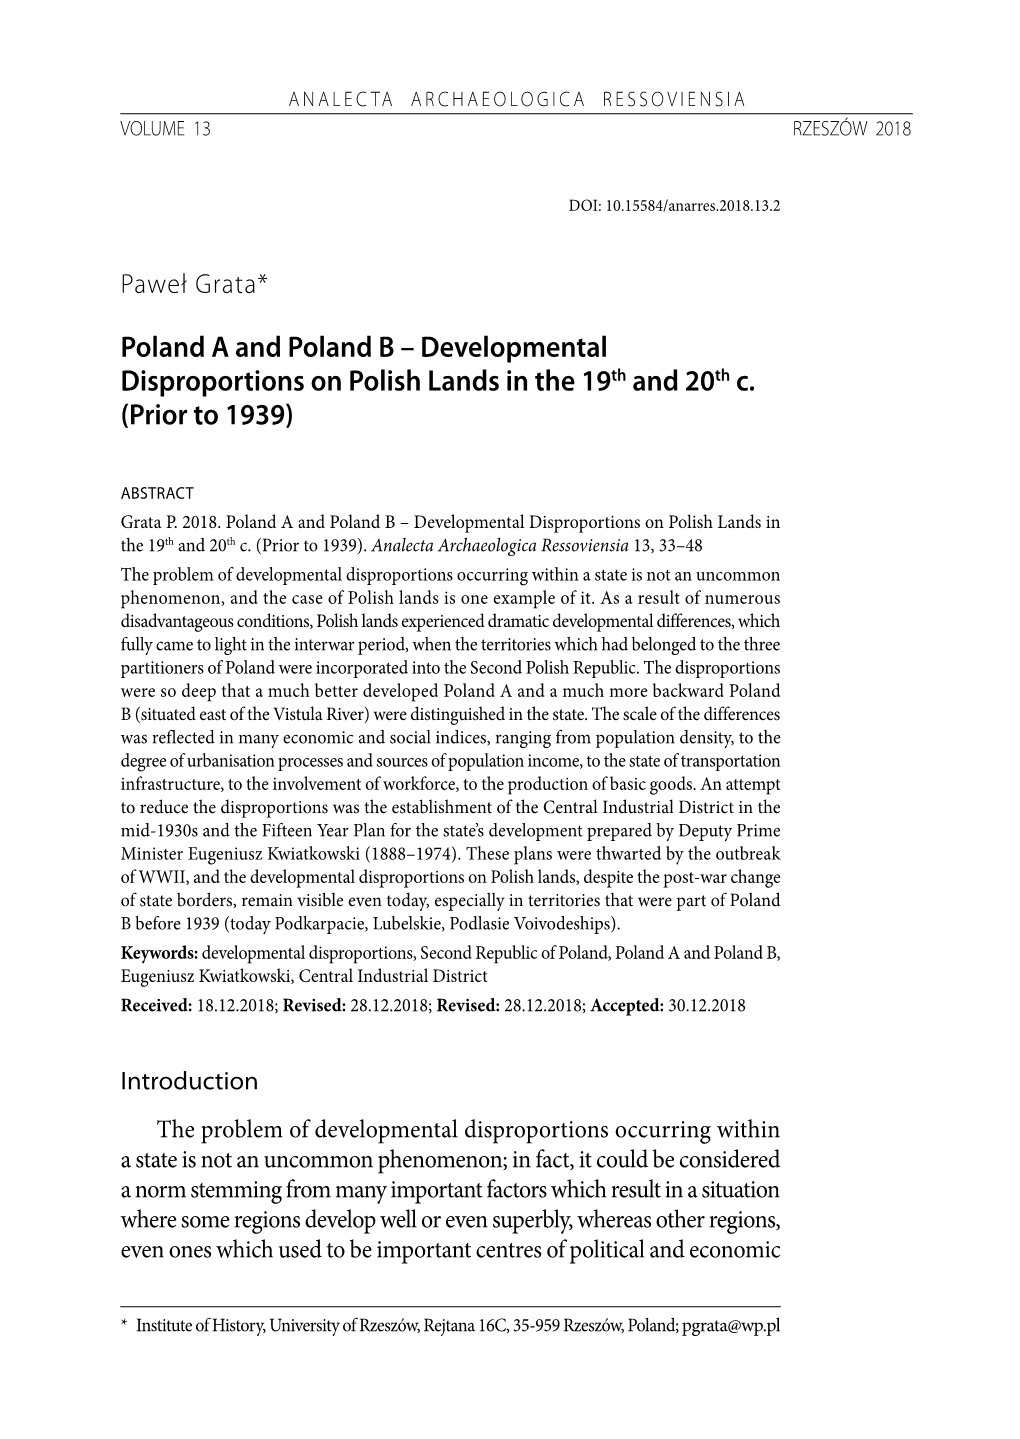 Developmental Disproportions on Polish Lands in the 19Th and 20Th C. (Prior to 1939)